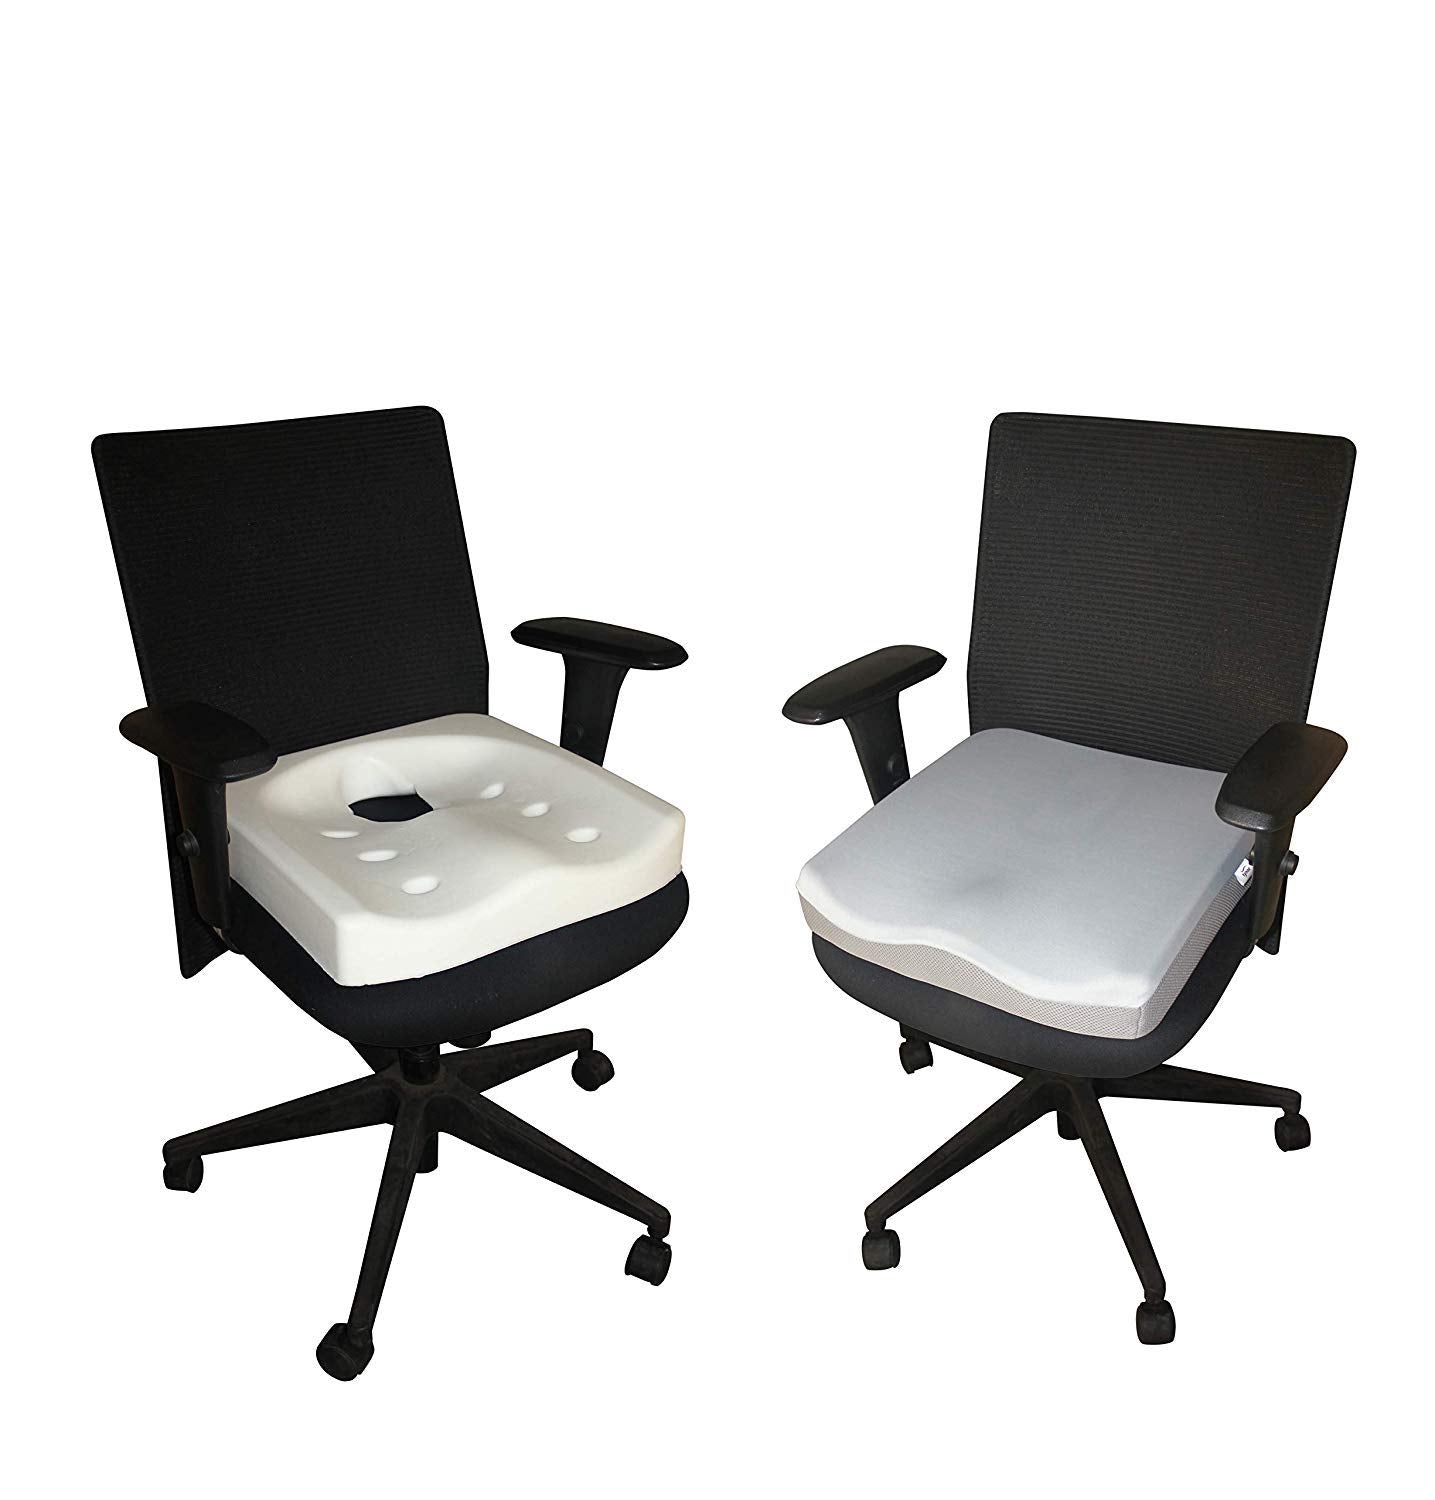 Buy Coccyx Seat Cushion & Lumbar Support Pillow for Office Chair